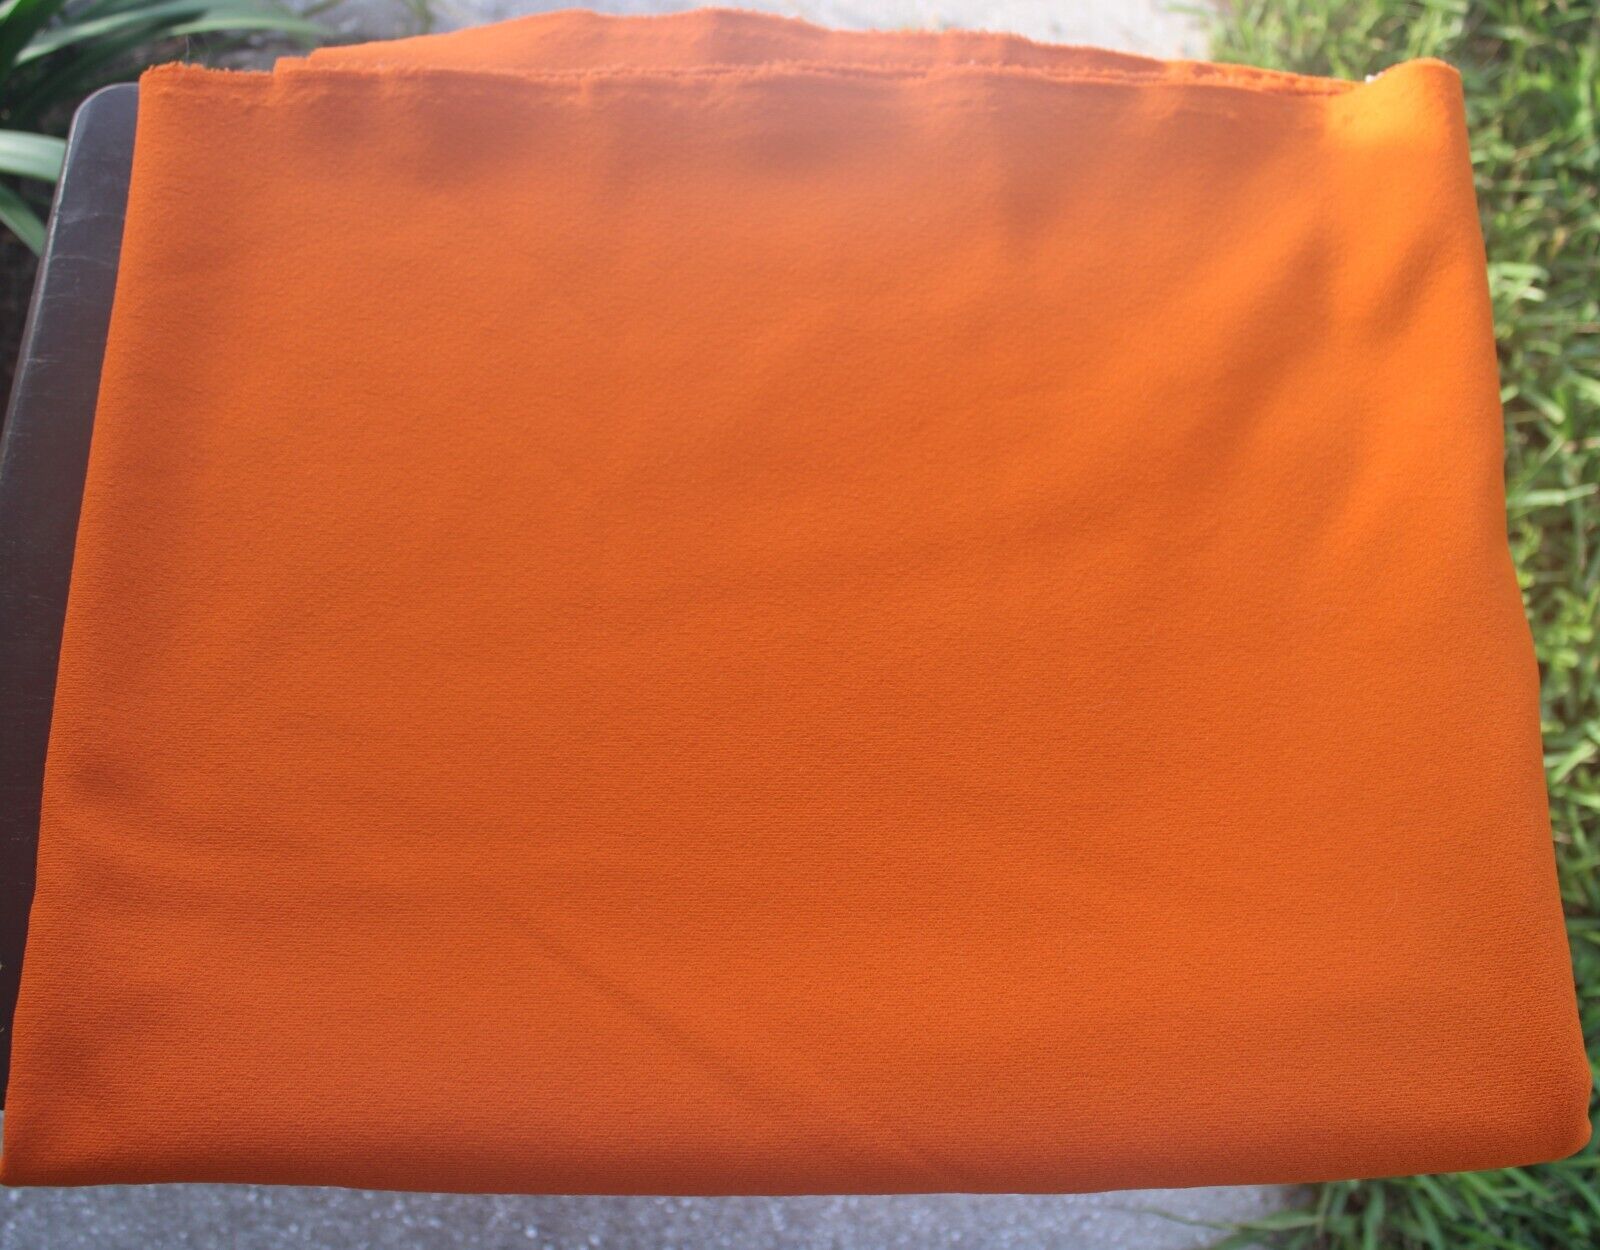 Vintage 1970s Burnt Orange Polyester Double Knit Garment Fabric, 2 yds x 56 in